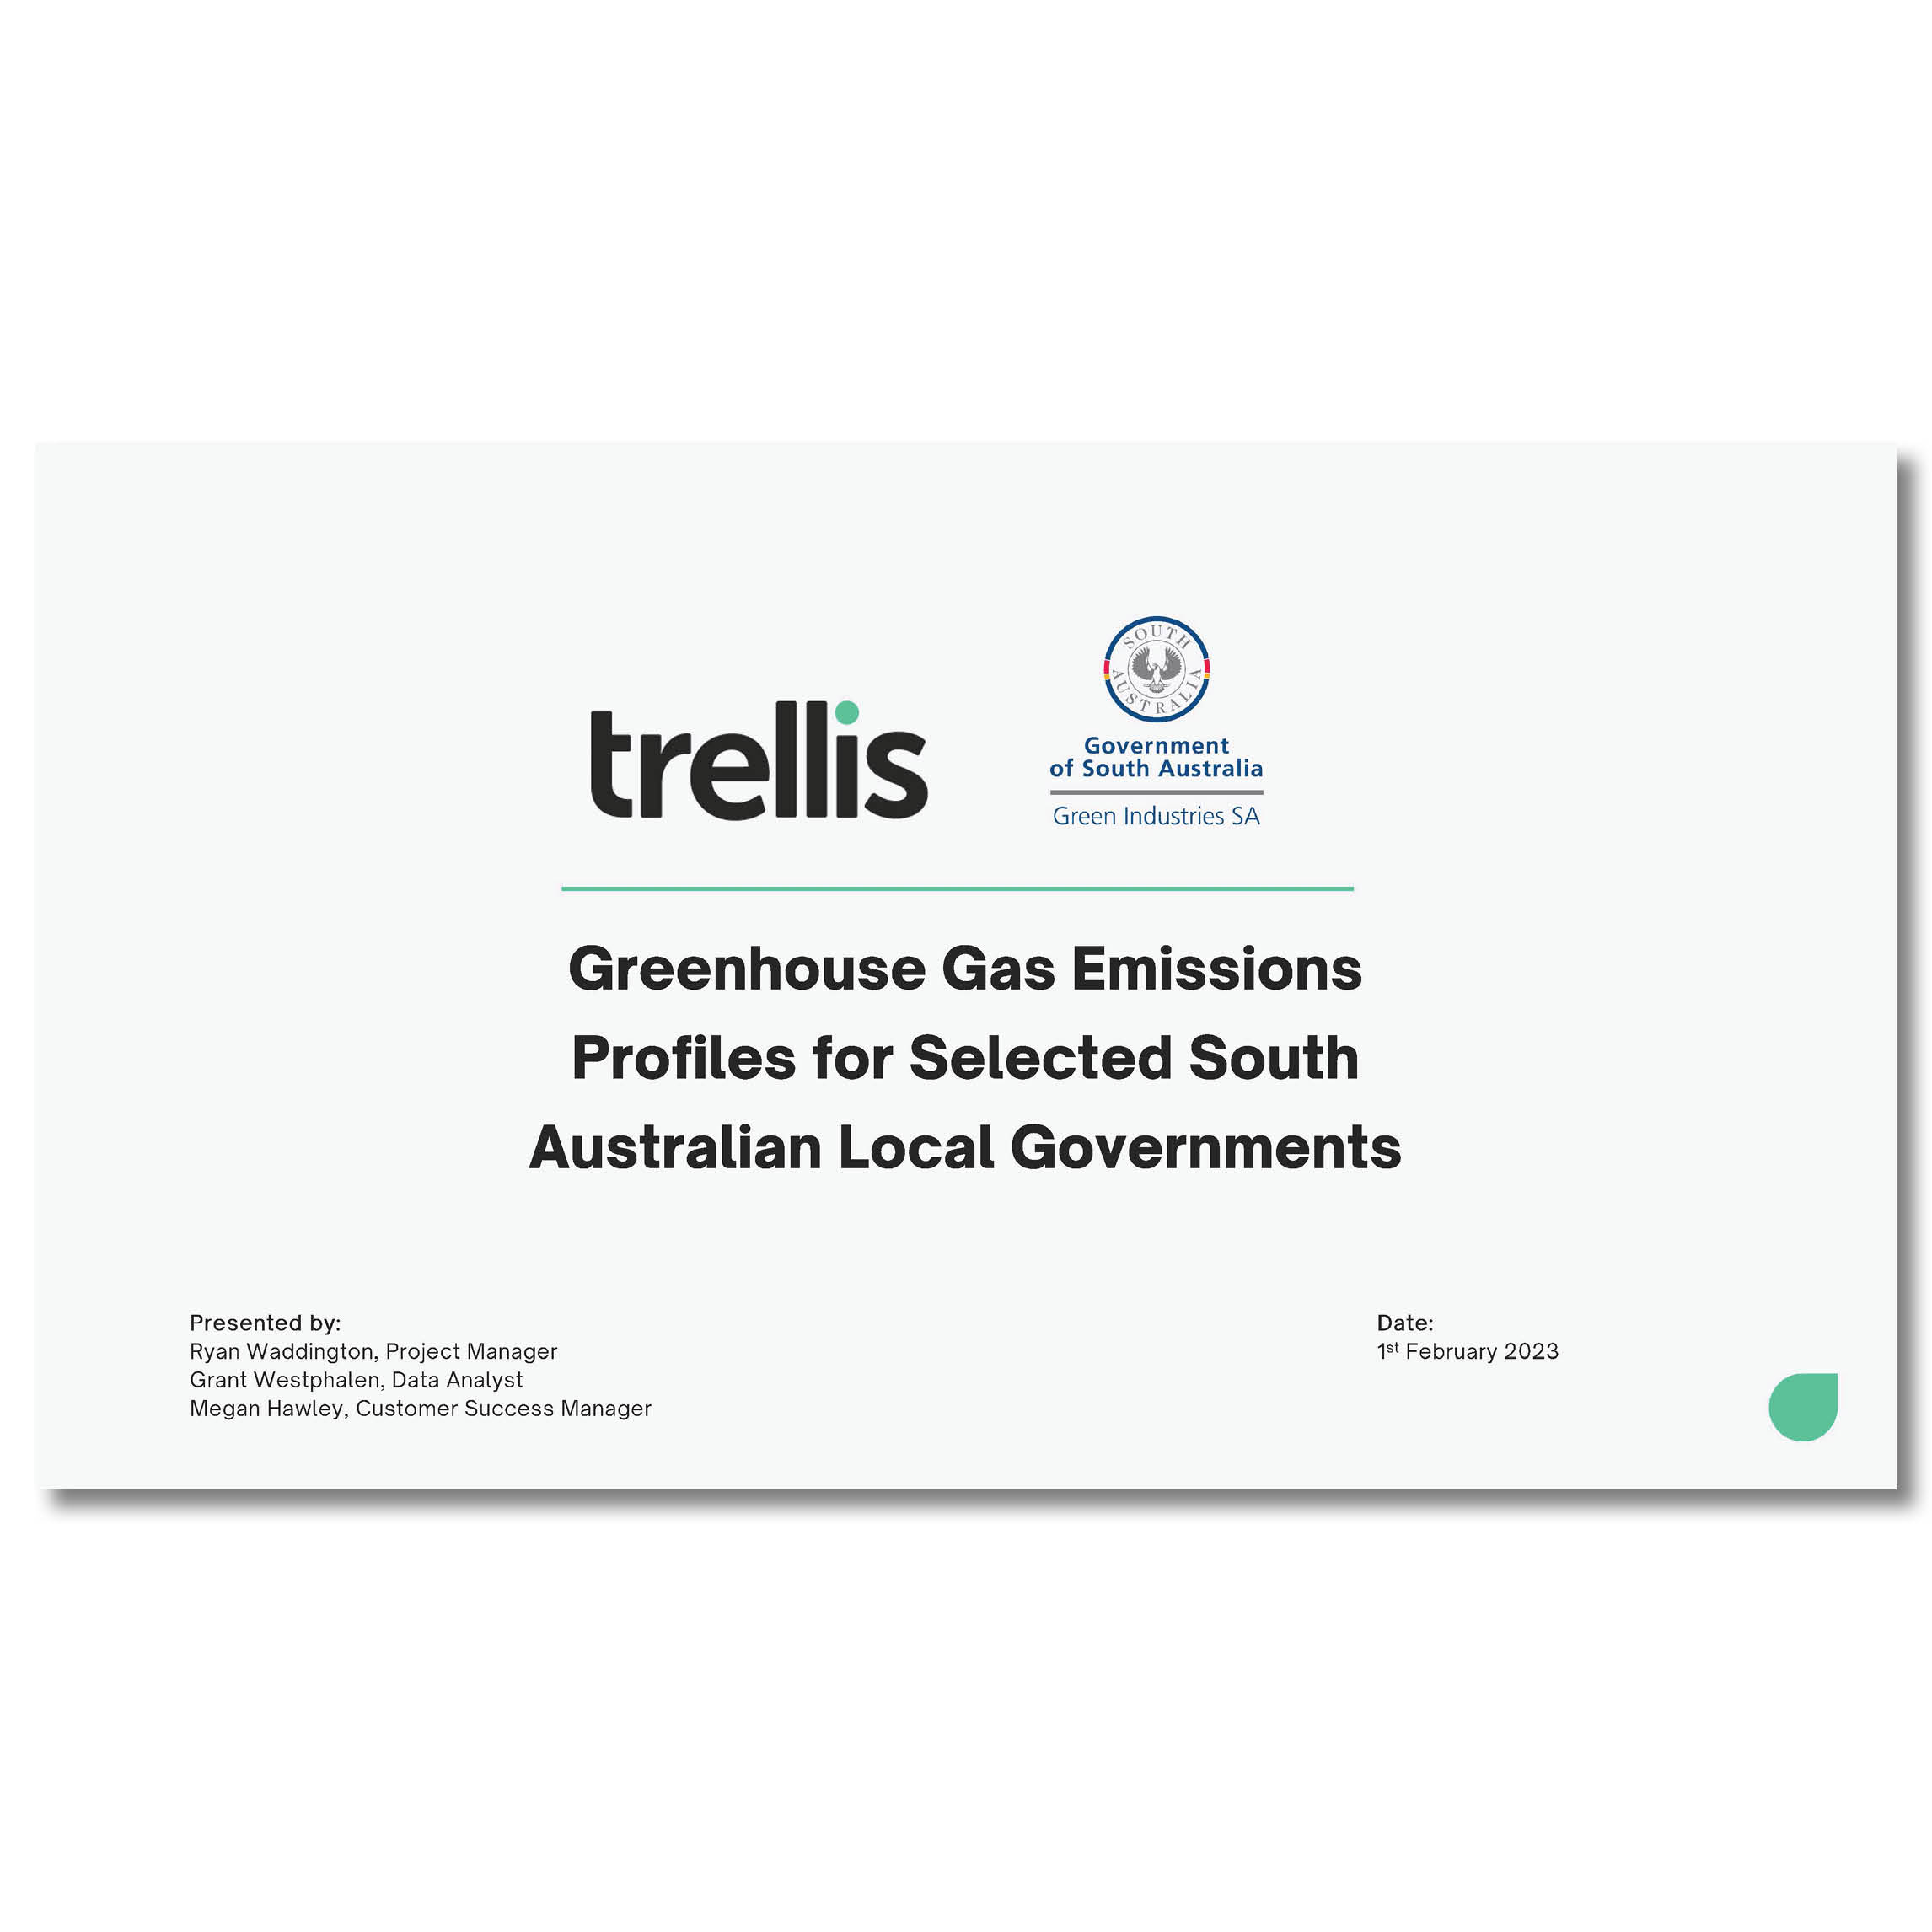 Greenhouse Gas Emissions Profiles for Selected South Australian Local Governments summary presentation